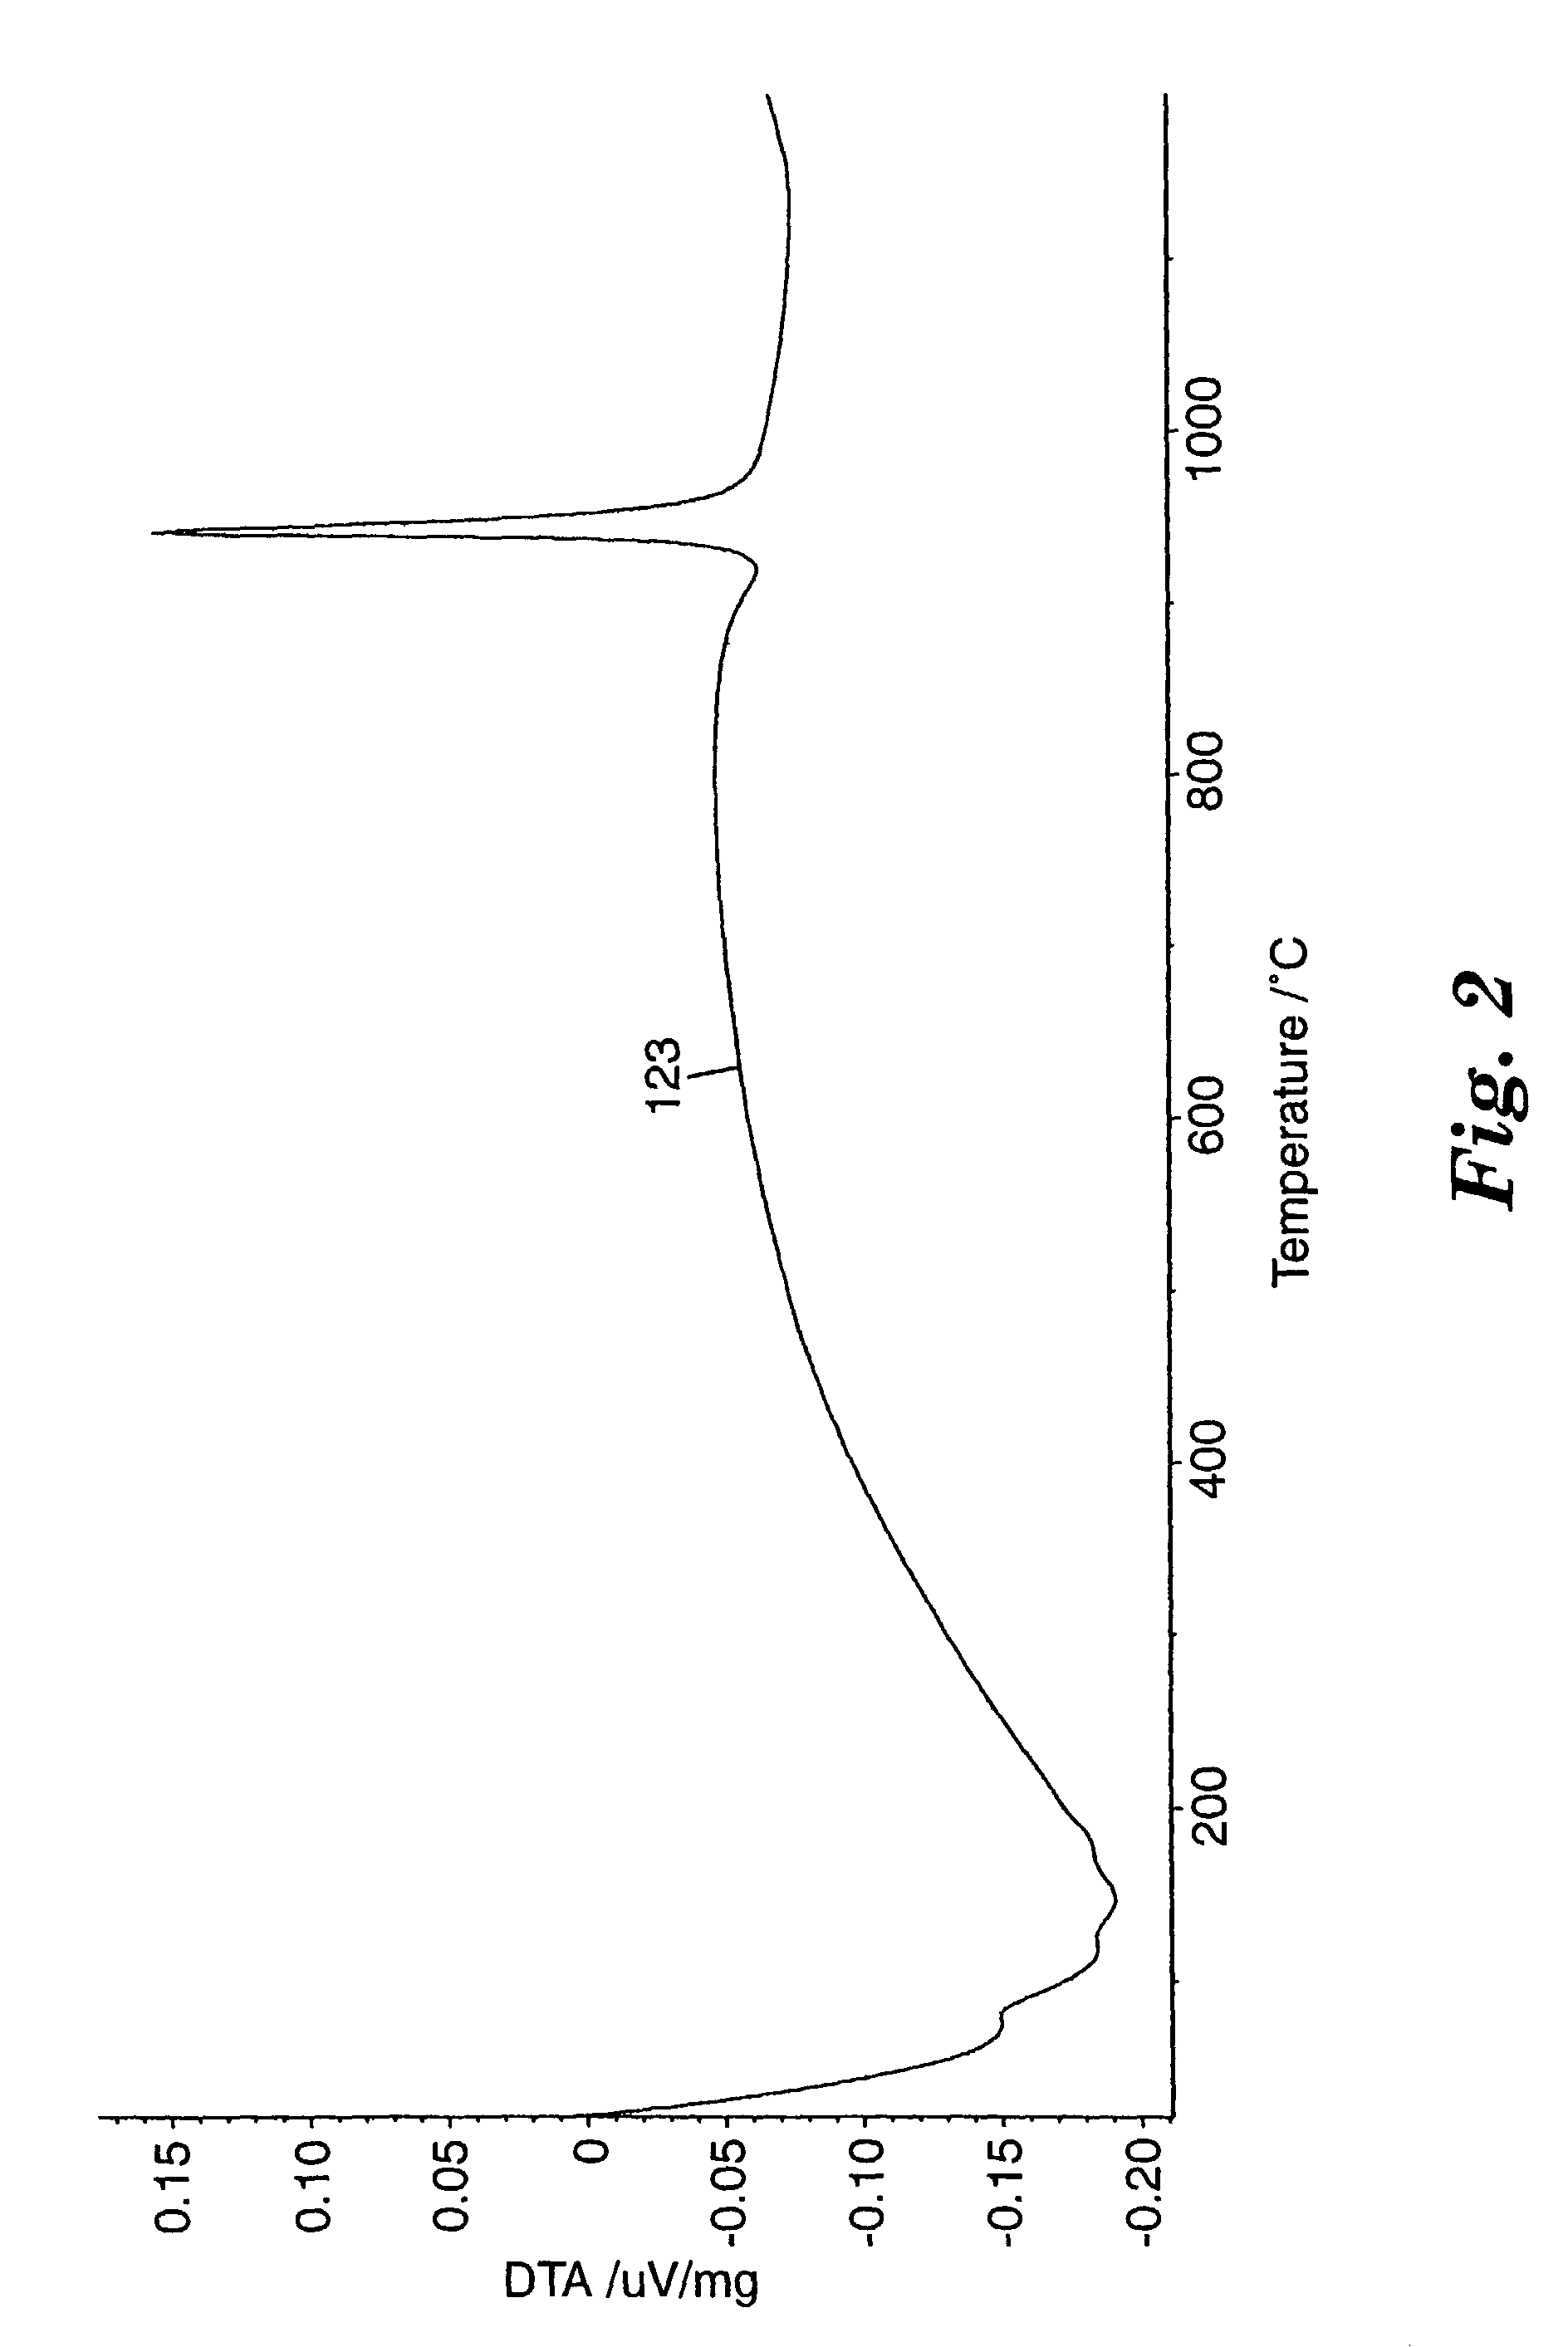 Al2O3-Y2O3-ZrO2/HfO2 materials, and methods of making and using the same